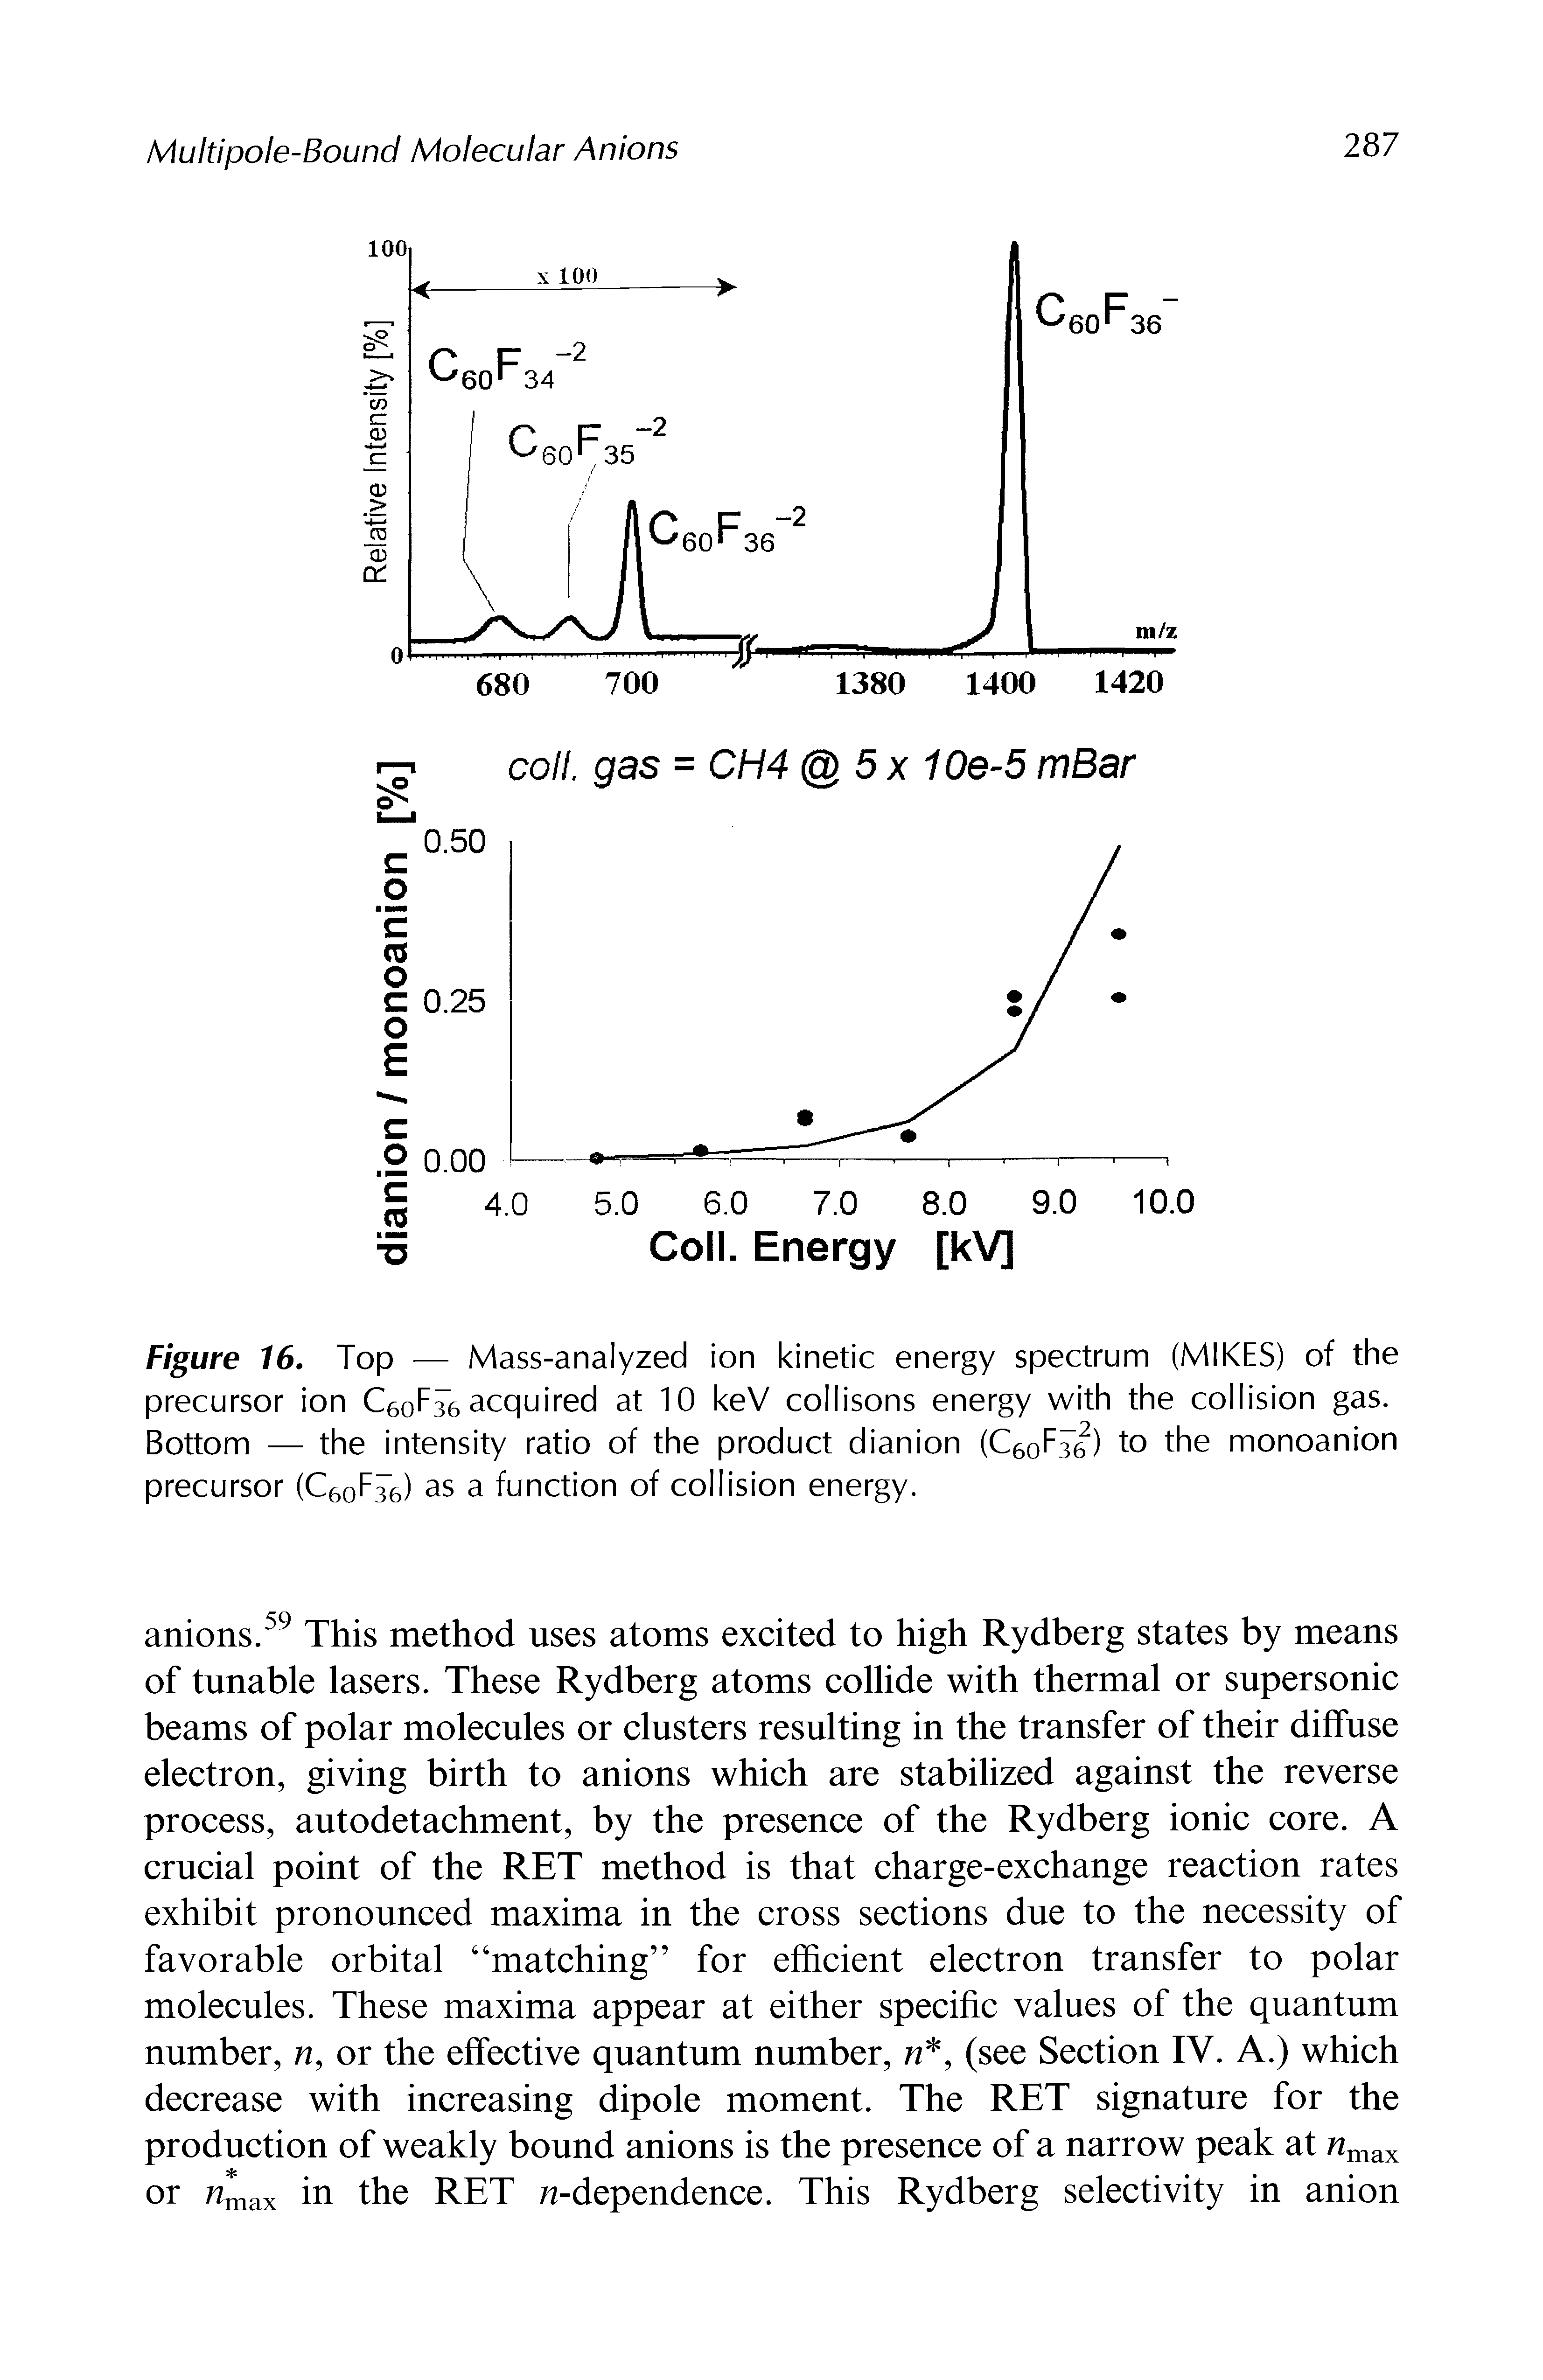 Figure 16, Top — Mass-analyzed ion kinetic energy spectrum (MIKES) of the precursor ion CeoFTe acquired at 10 keV collisons energy with the collision gas. Bottom — the intensity ratio of the product dianion (CeoFTe) to the monoanion precursor (CeoFTe) as a function of collision energy.